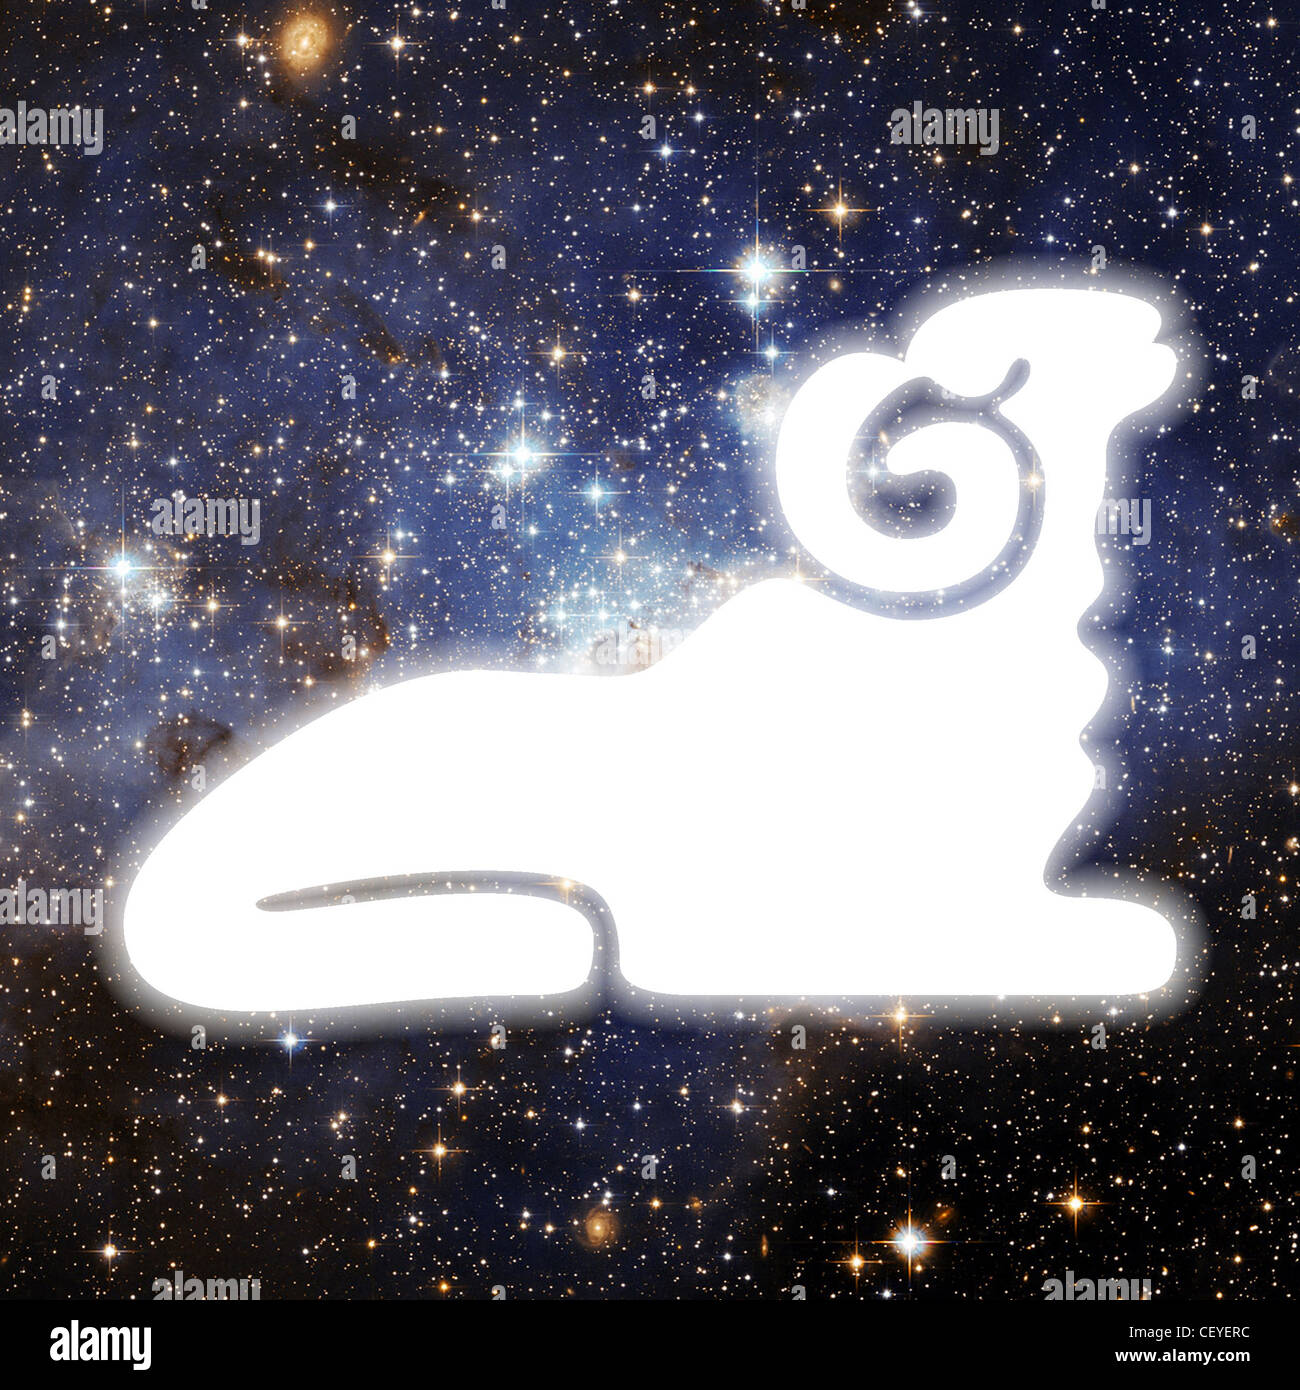 An illustration of a white silhouette of a resting ram, set against a background of space filled with stars Stock Photo